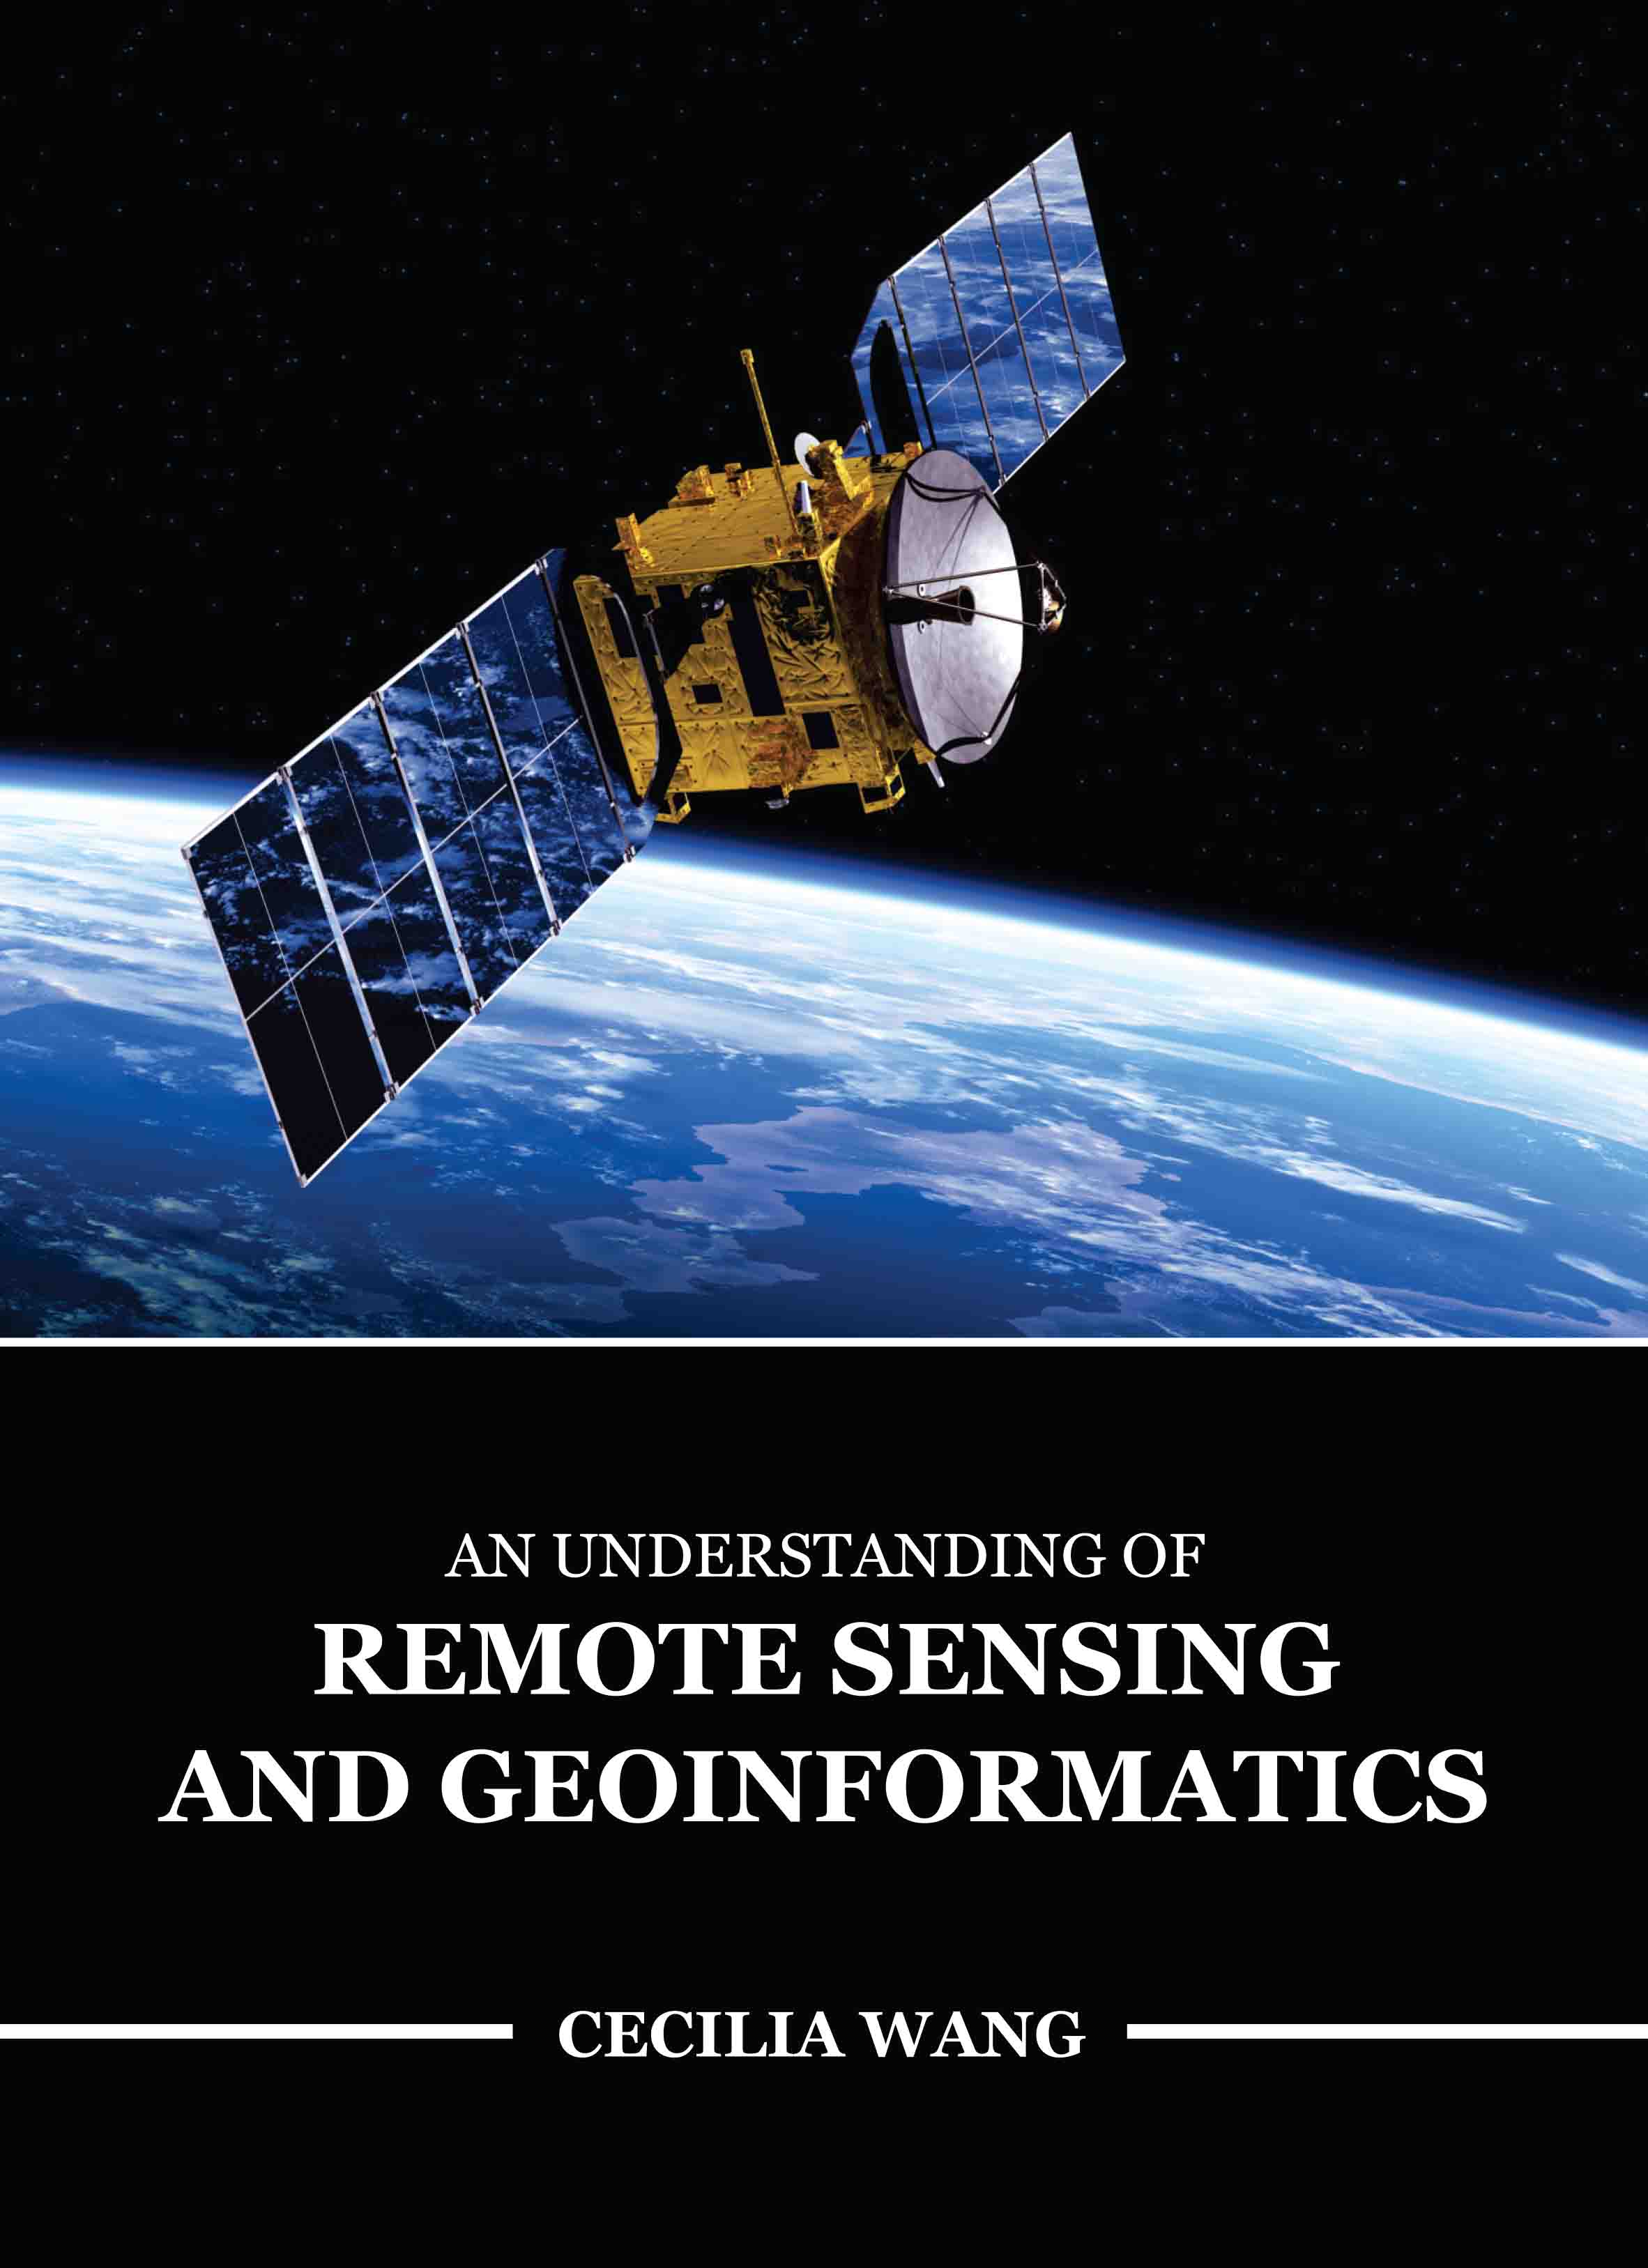 An Understanding of Remote Sensing and Geoinformatics